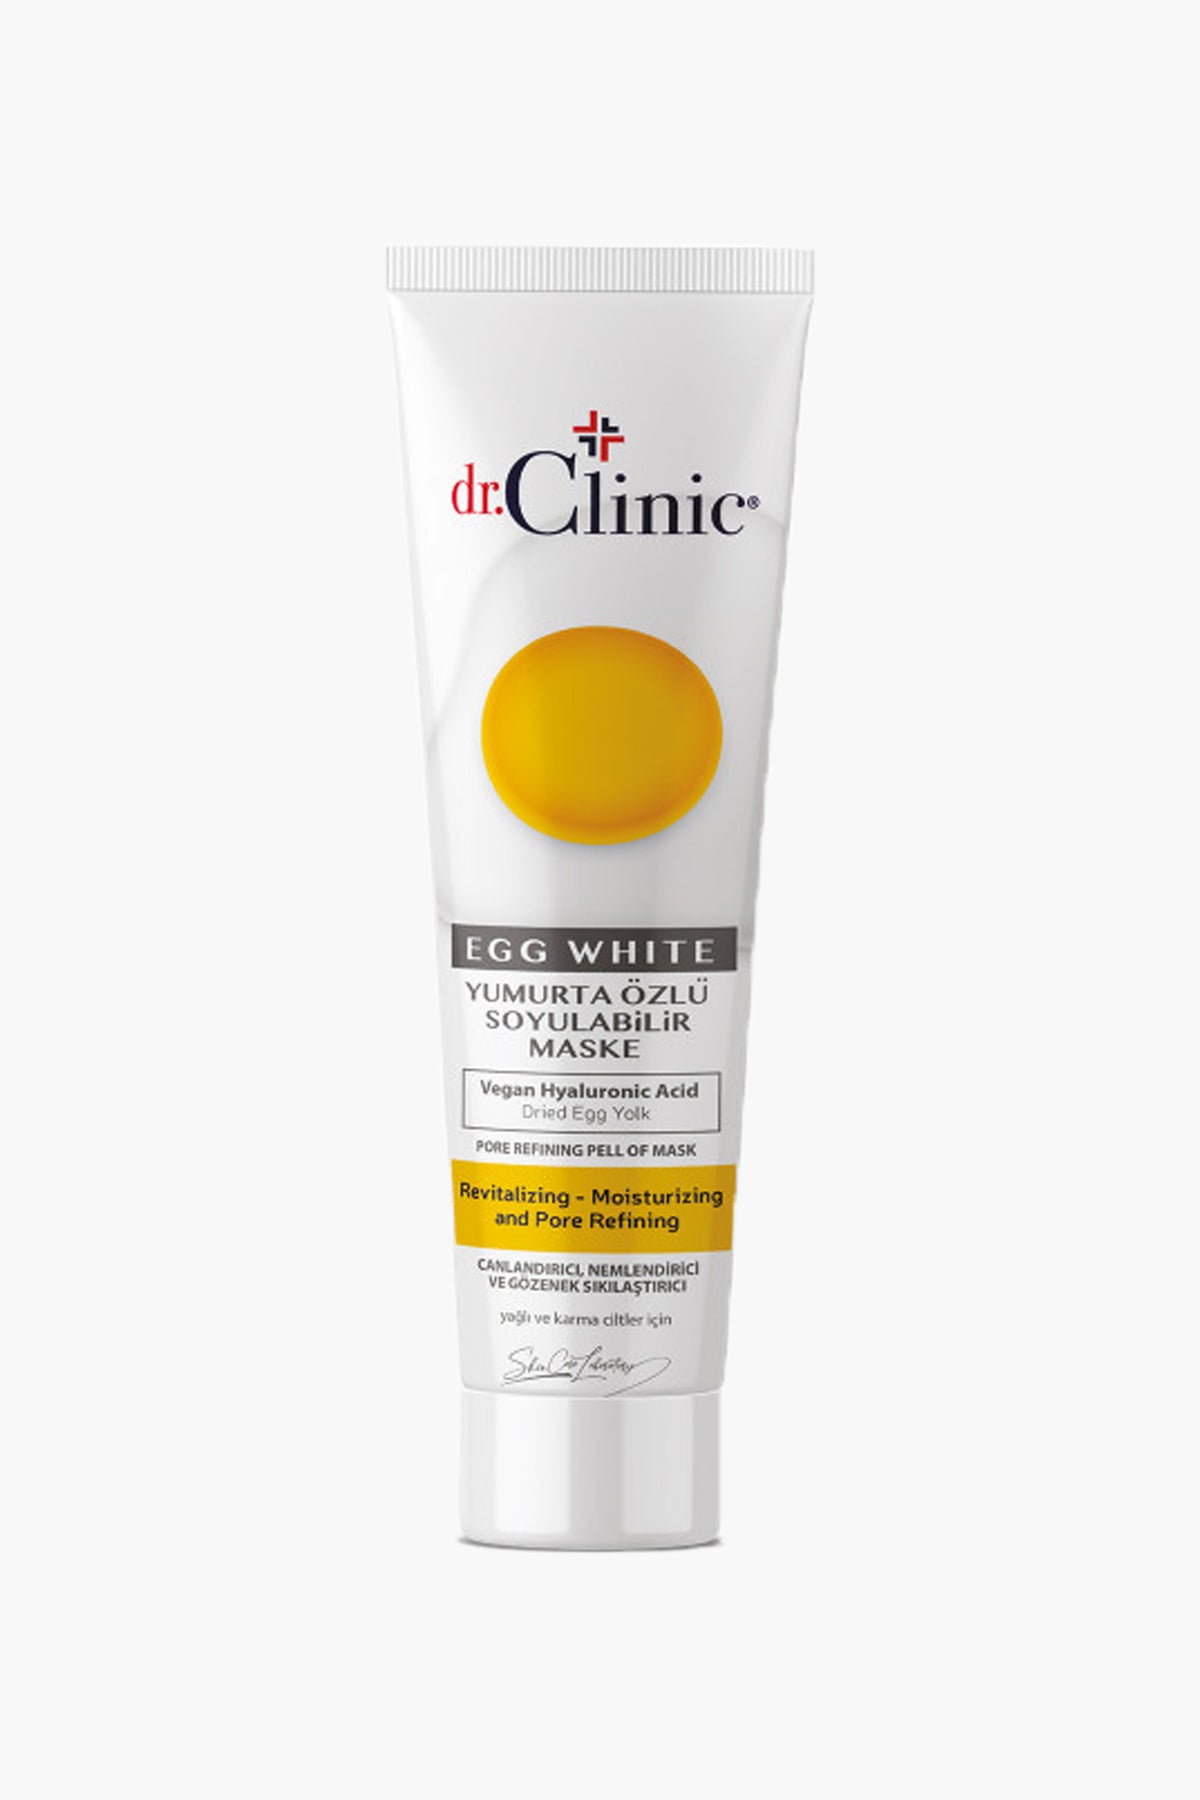 Load image into Gallery viewer, Egg White Pore Refining Peel Off Mask - 100 ml - Dr.Clinic
